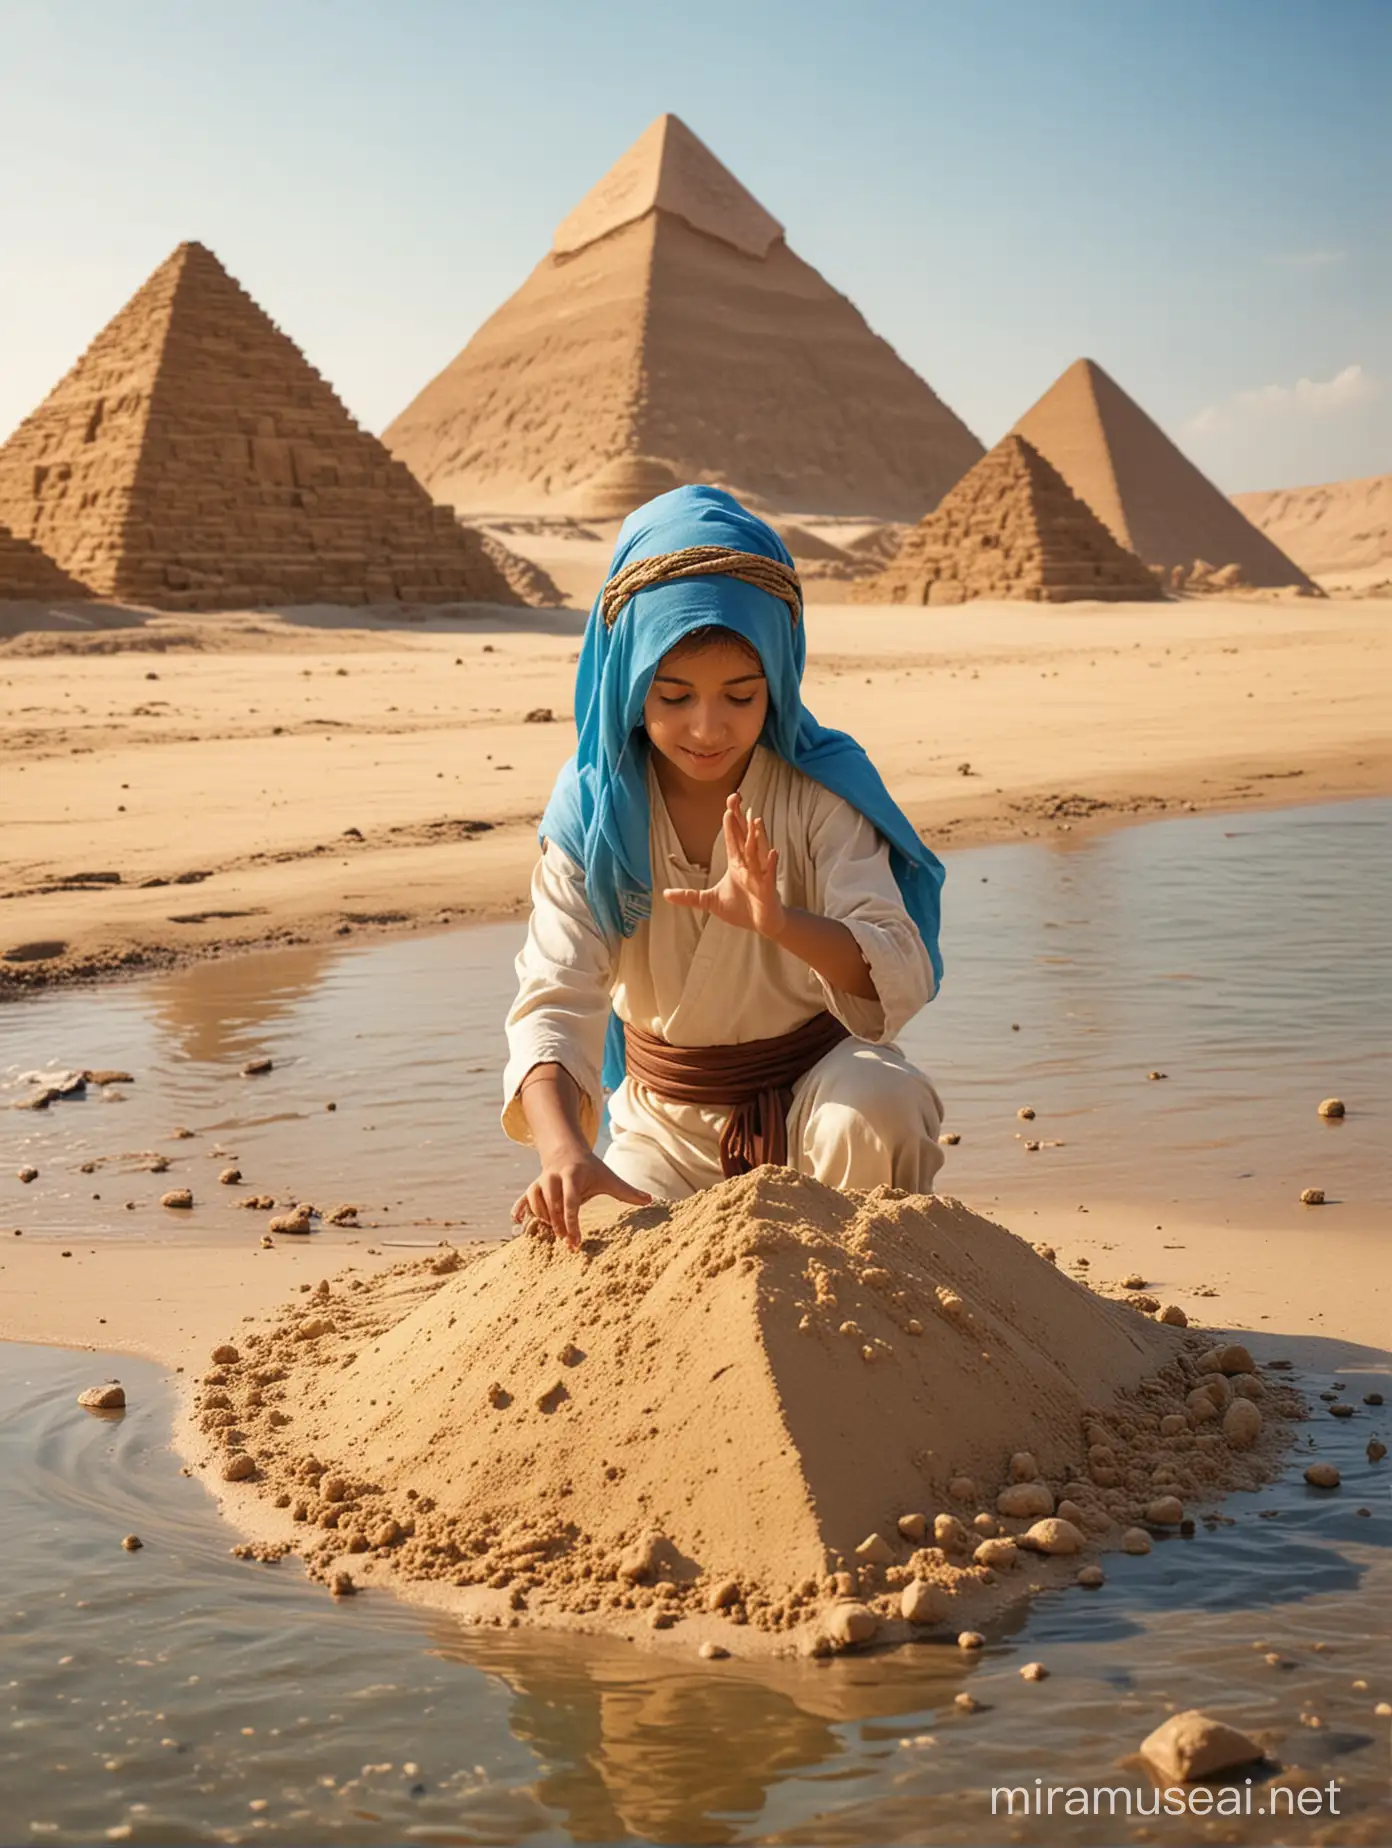 Jesus child playing sand with his friends in river blue side, background pyramid